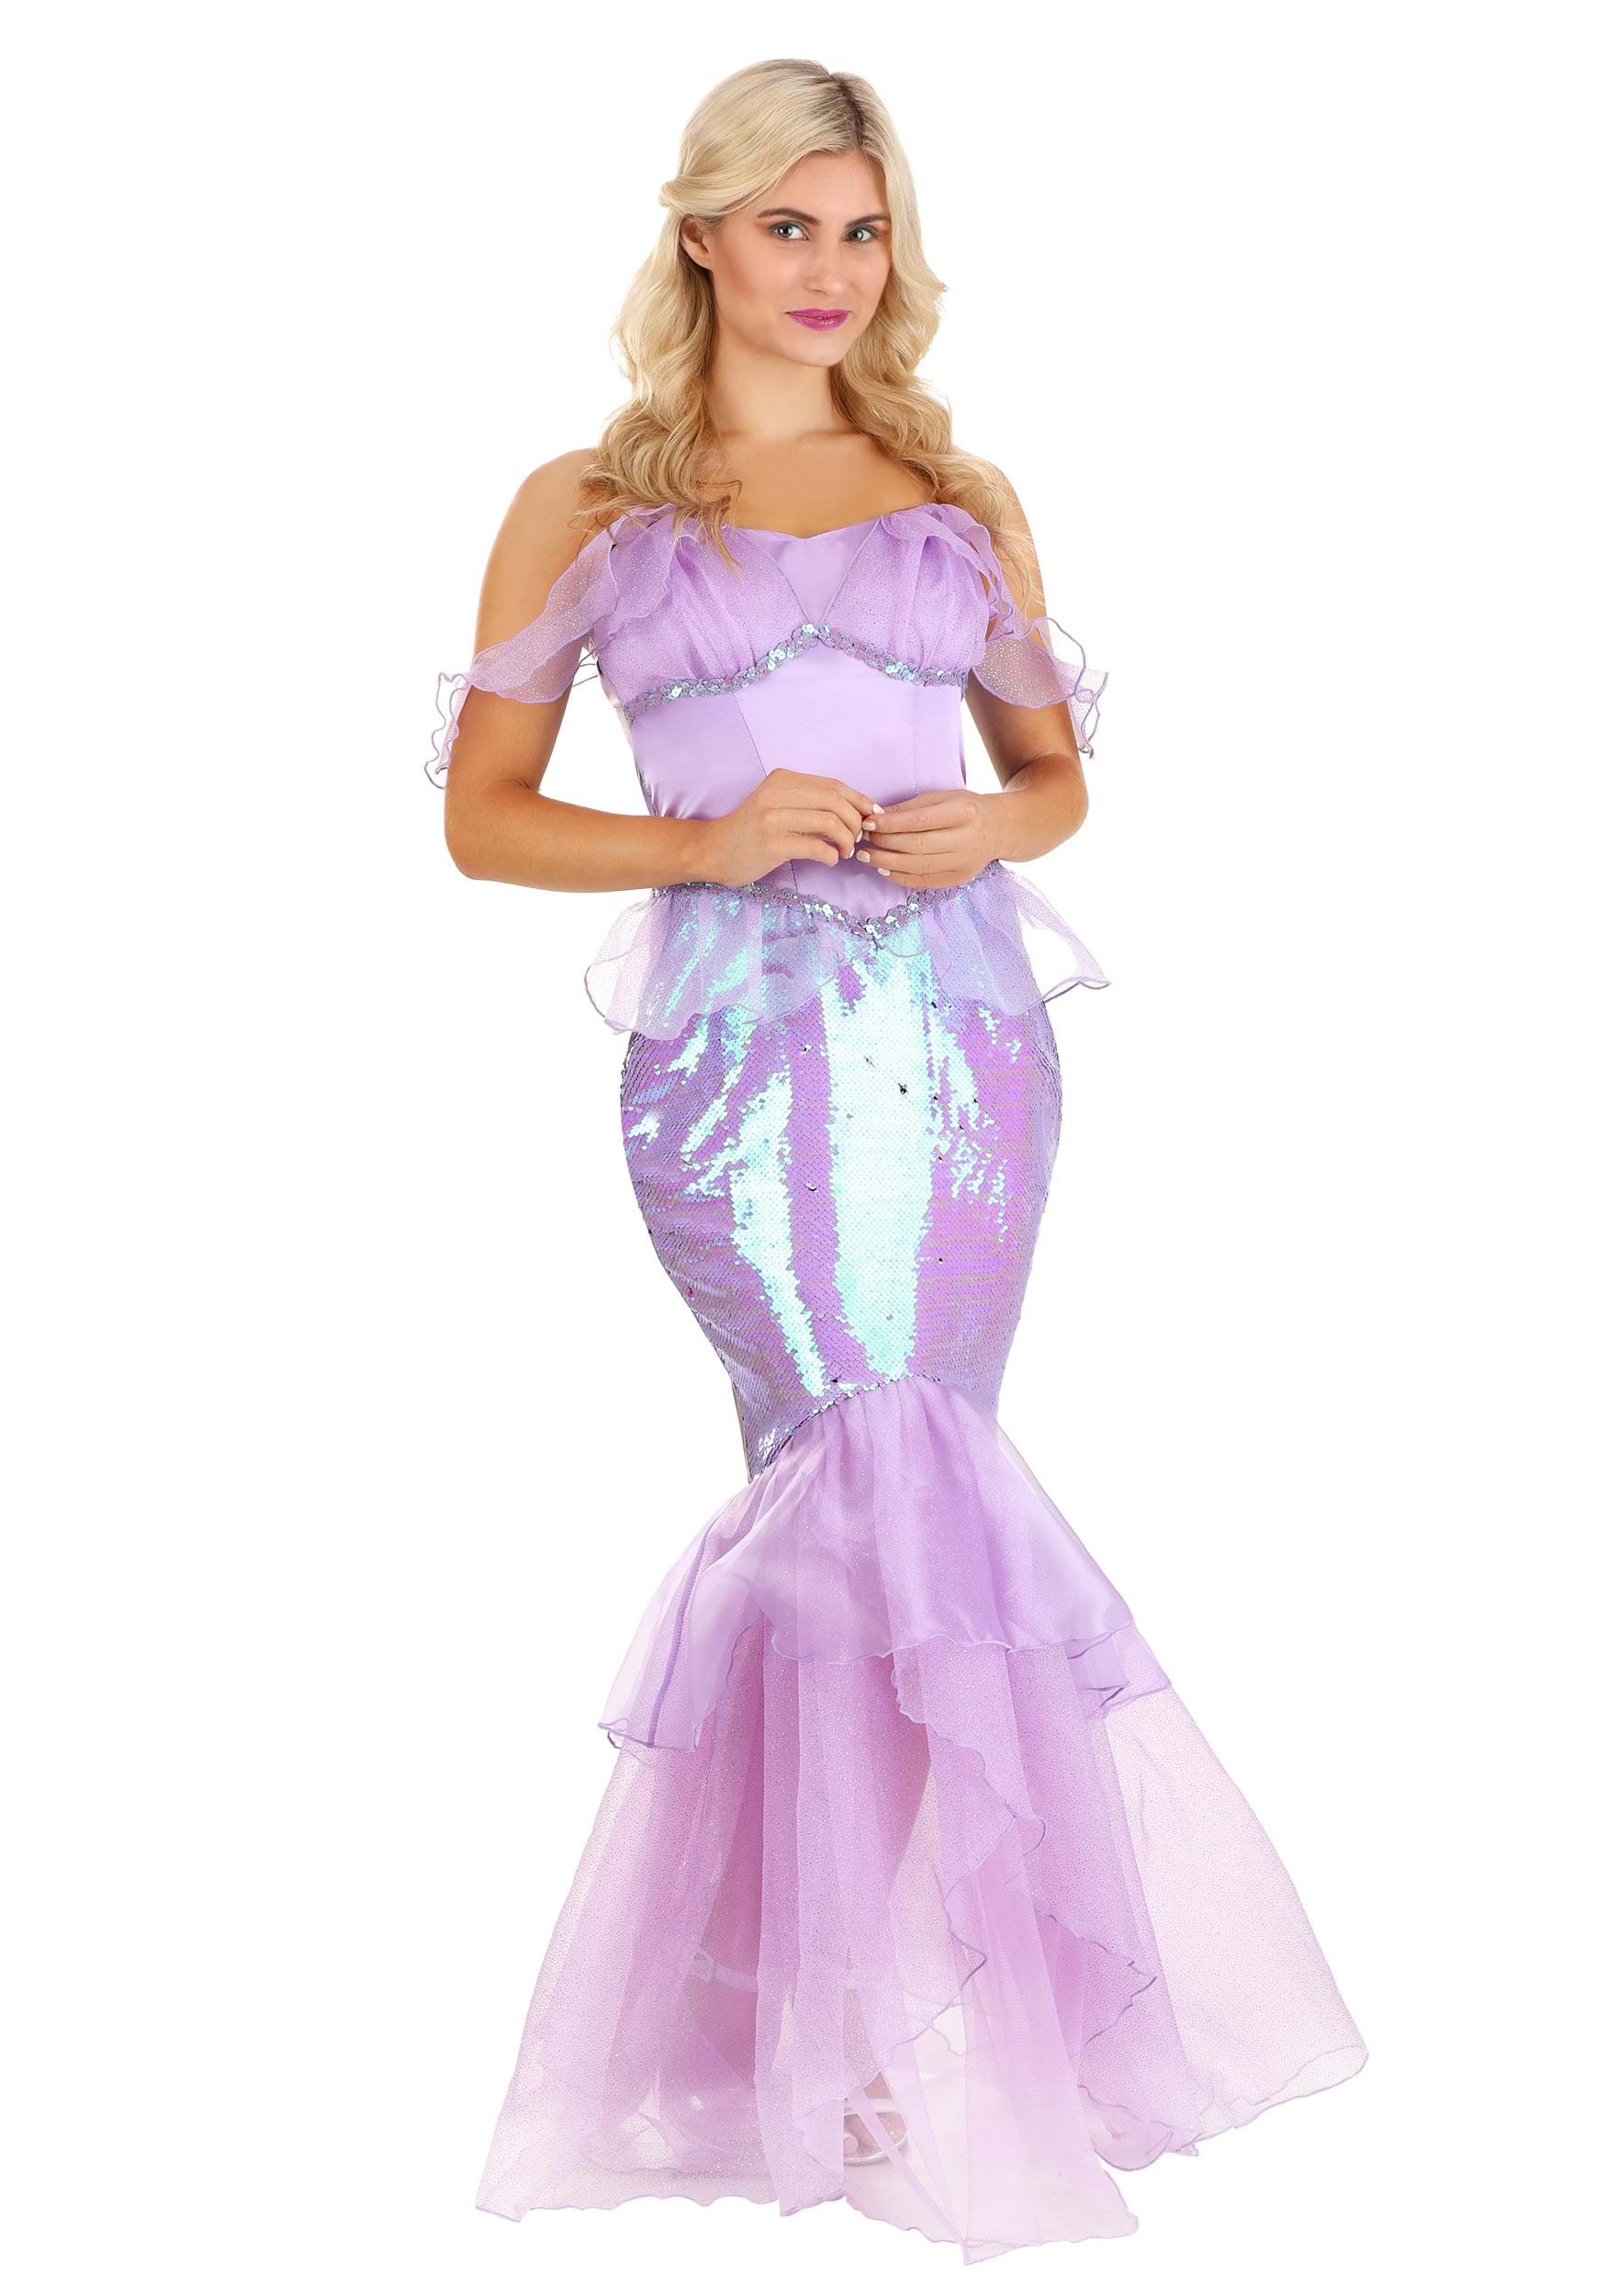 Image of Women's Deluxe Under the Sea Beauty Costume ID FUN4221AD-L